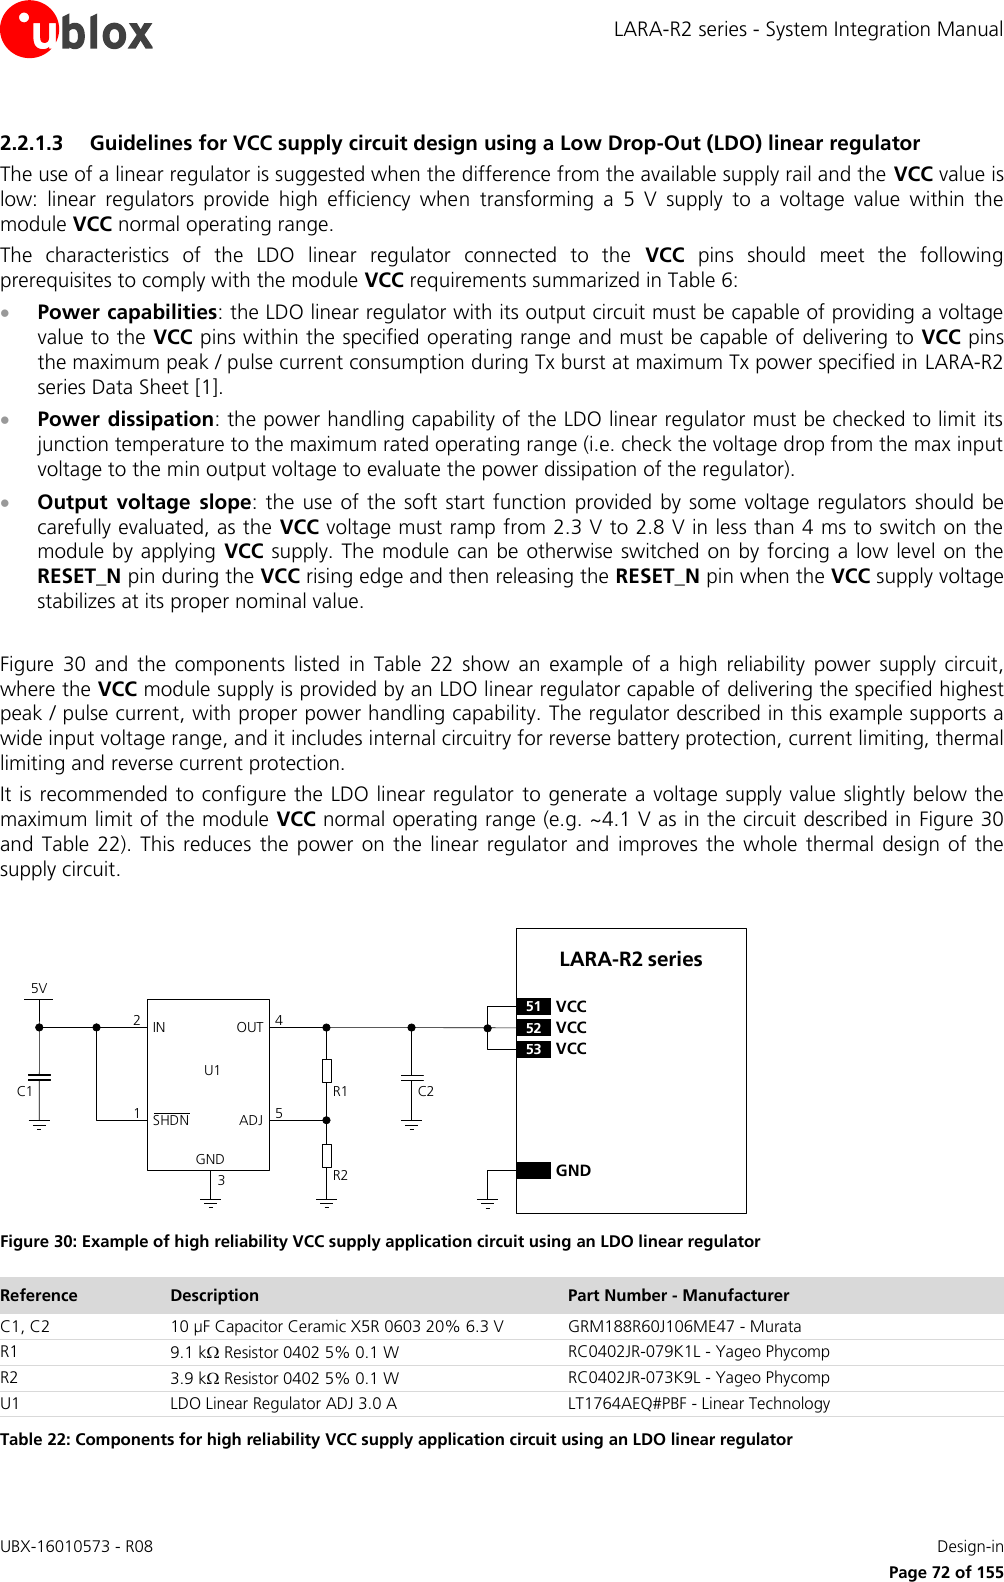 LARA-R2 series - System Integration Manual UBX-16010573 - R08    Design-in     Page 72 of 155 2.2.1.3 Guidelines for VCC supply circuit design using a Low Drop-Out (LDO) linear regulator The use of a linear regulator is suggested when the difference from the available supply rail and the VCC value is low:  linear  regulators  provide  high  efficiency  when  transforming  a  5  V  supply  to  a  voltage  value  within  the module VCC normal operating range. The  characteristics  of  the  LDO  linear  regulator  connected  to  the  VCC  pins  should  meet  the  following prerequisites to comply with the module VCC requirements summarized in Table 6:  Power capabilities: the LDO linear regulator with its output circuit must be capable of providing a voltage value to the VCC pins within the specified operating range and must be capable of  delivering to VCC pins the maximum peak / pulse current consumption during Tx burst at maximum Tx power specified in LARA-R2 series Data Sheet [1].  Power dissipation: the power handling capability of the LDO linear regulator must be checked to limit its junction temperature to the maximum rated operating range (i.e. check the voltage drop from the max input voltage to the min output voltage to evaluate the power dissipation of the regulator).  Output  voltage  slope:  the  use of the  soft  start  function provided by some voltage regulators  should be carefully evaluated, as the VCC voltage must ramp from 2.3 V to 2.8 V in less than 4 ms to switch on the module by  applying  VCC  supply. The module can  be otherwise switched on  by forcing a  low level on the RESET_N pin during the VCC rising edge and then releasing the RESET_N pin when the VCC supply voltage stabilizes at its proper nominal value.  Figure  30  and  the  components  listed  in  Table  22  show  an  example  of  a  high  reliability  power  supply  circuit, where the VCC module supply is provided by an LDO linear regulator capable of delivering the specified highest peak / pulse current, with proper power handling capability. The regulator described in this example supports a wide input voltage range, and it includes internal circuitry for reverse battery protection, current limiting, thermal limiting and reverse current protection. It is recommended to configure the LDO linear regulator  to generate a voltage supply value slightly below the maximum limit of the module VCC normal operating range (e.g. ~4.1 V as in the circuit described in Figure 30 and  Table  22).  This  reduces  the  power  on the  linear  regulator  and  improves the  whole  thermal design  of  the supply circuit.  5VC1IN OUTADJGND12453C2R1R2U1SHDNLARA-R2 series52 VCC53 VCC51 VCCGND Figure 30: Example of high reliability VCC supply application circuit using an LDO linear regulator Reference Description Part Number - Manufacturer C1, C2 10 µF Capacitor Ceramic X5R 0603 20% 6.3 V GRM188R60J106ME47 - Murata R1 9.1 k Resistor 0402 5% 0.1 W RC0402JR-079K1L - Yageo Phycomp R2 3.9 k Resistor 0402 5% 0.1 W RC0402JR-073K9L - Yageo Phycomp U1 LDO Linear Regulator ADJ 3.0 A LT1764AEQ#PBF - Linear Technology Table 22: Components for high reliability VCC supply application circuit using an LDO linear regulator 